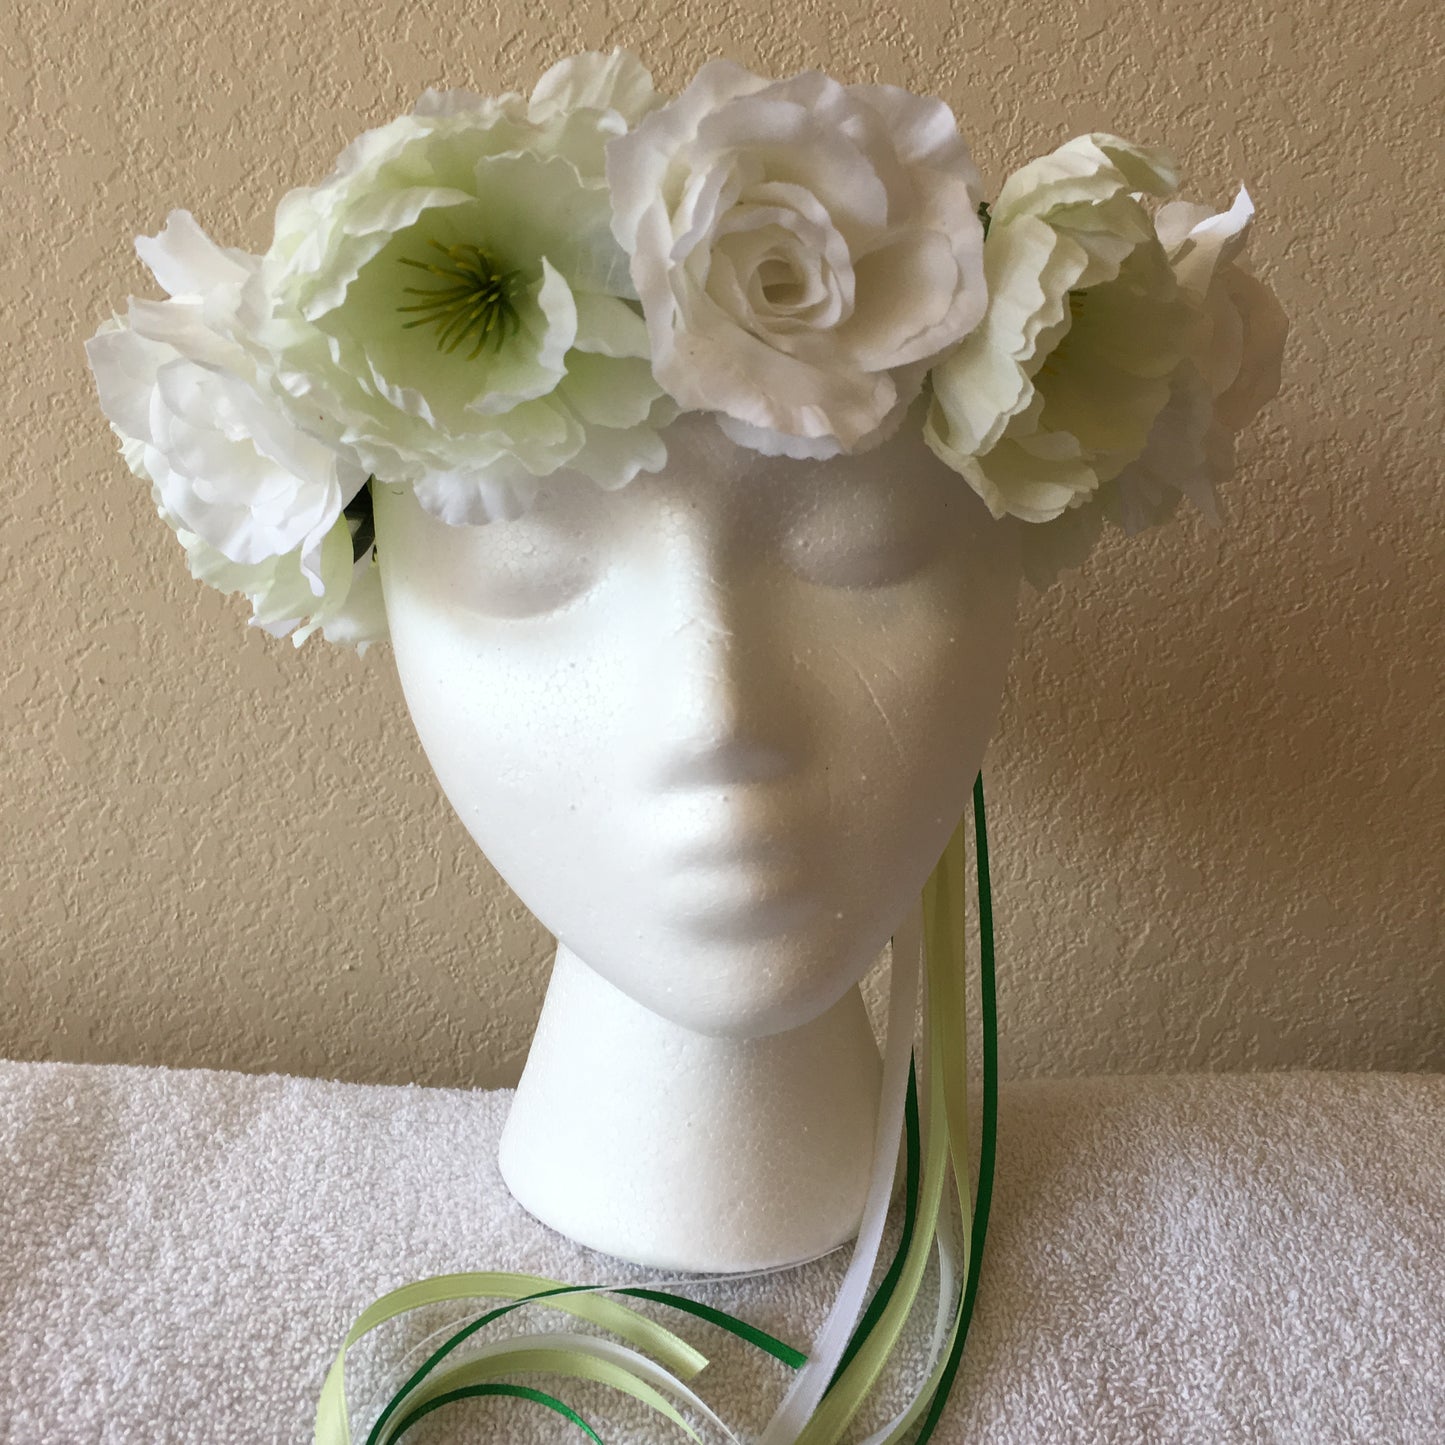 Medium Wreath - Pale green flowers & white roses (every other)